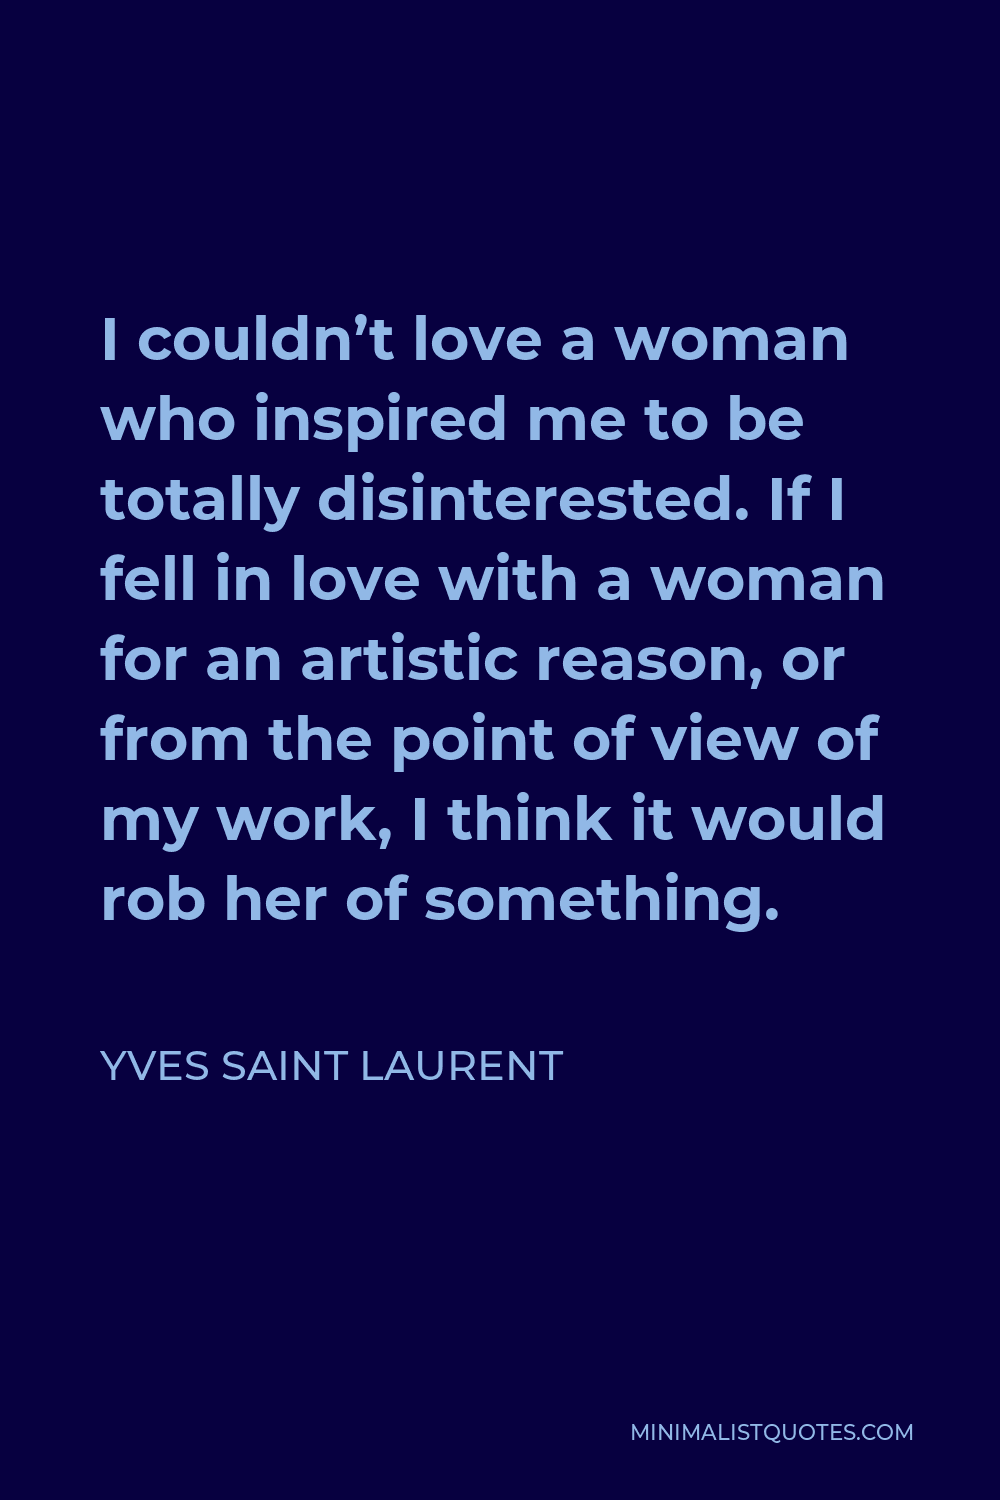 Yves Saint Laurent Quote - I couldn’t love a woman who inspired me to be totally disinterested. If I fell in love with a woman for an artistic reason, or from the point of view of my work, I think it would rob her of something.